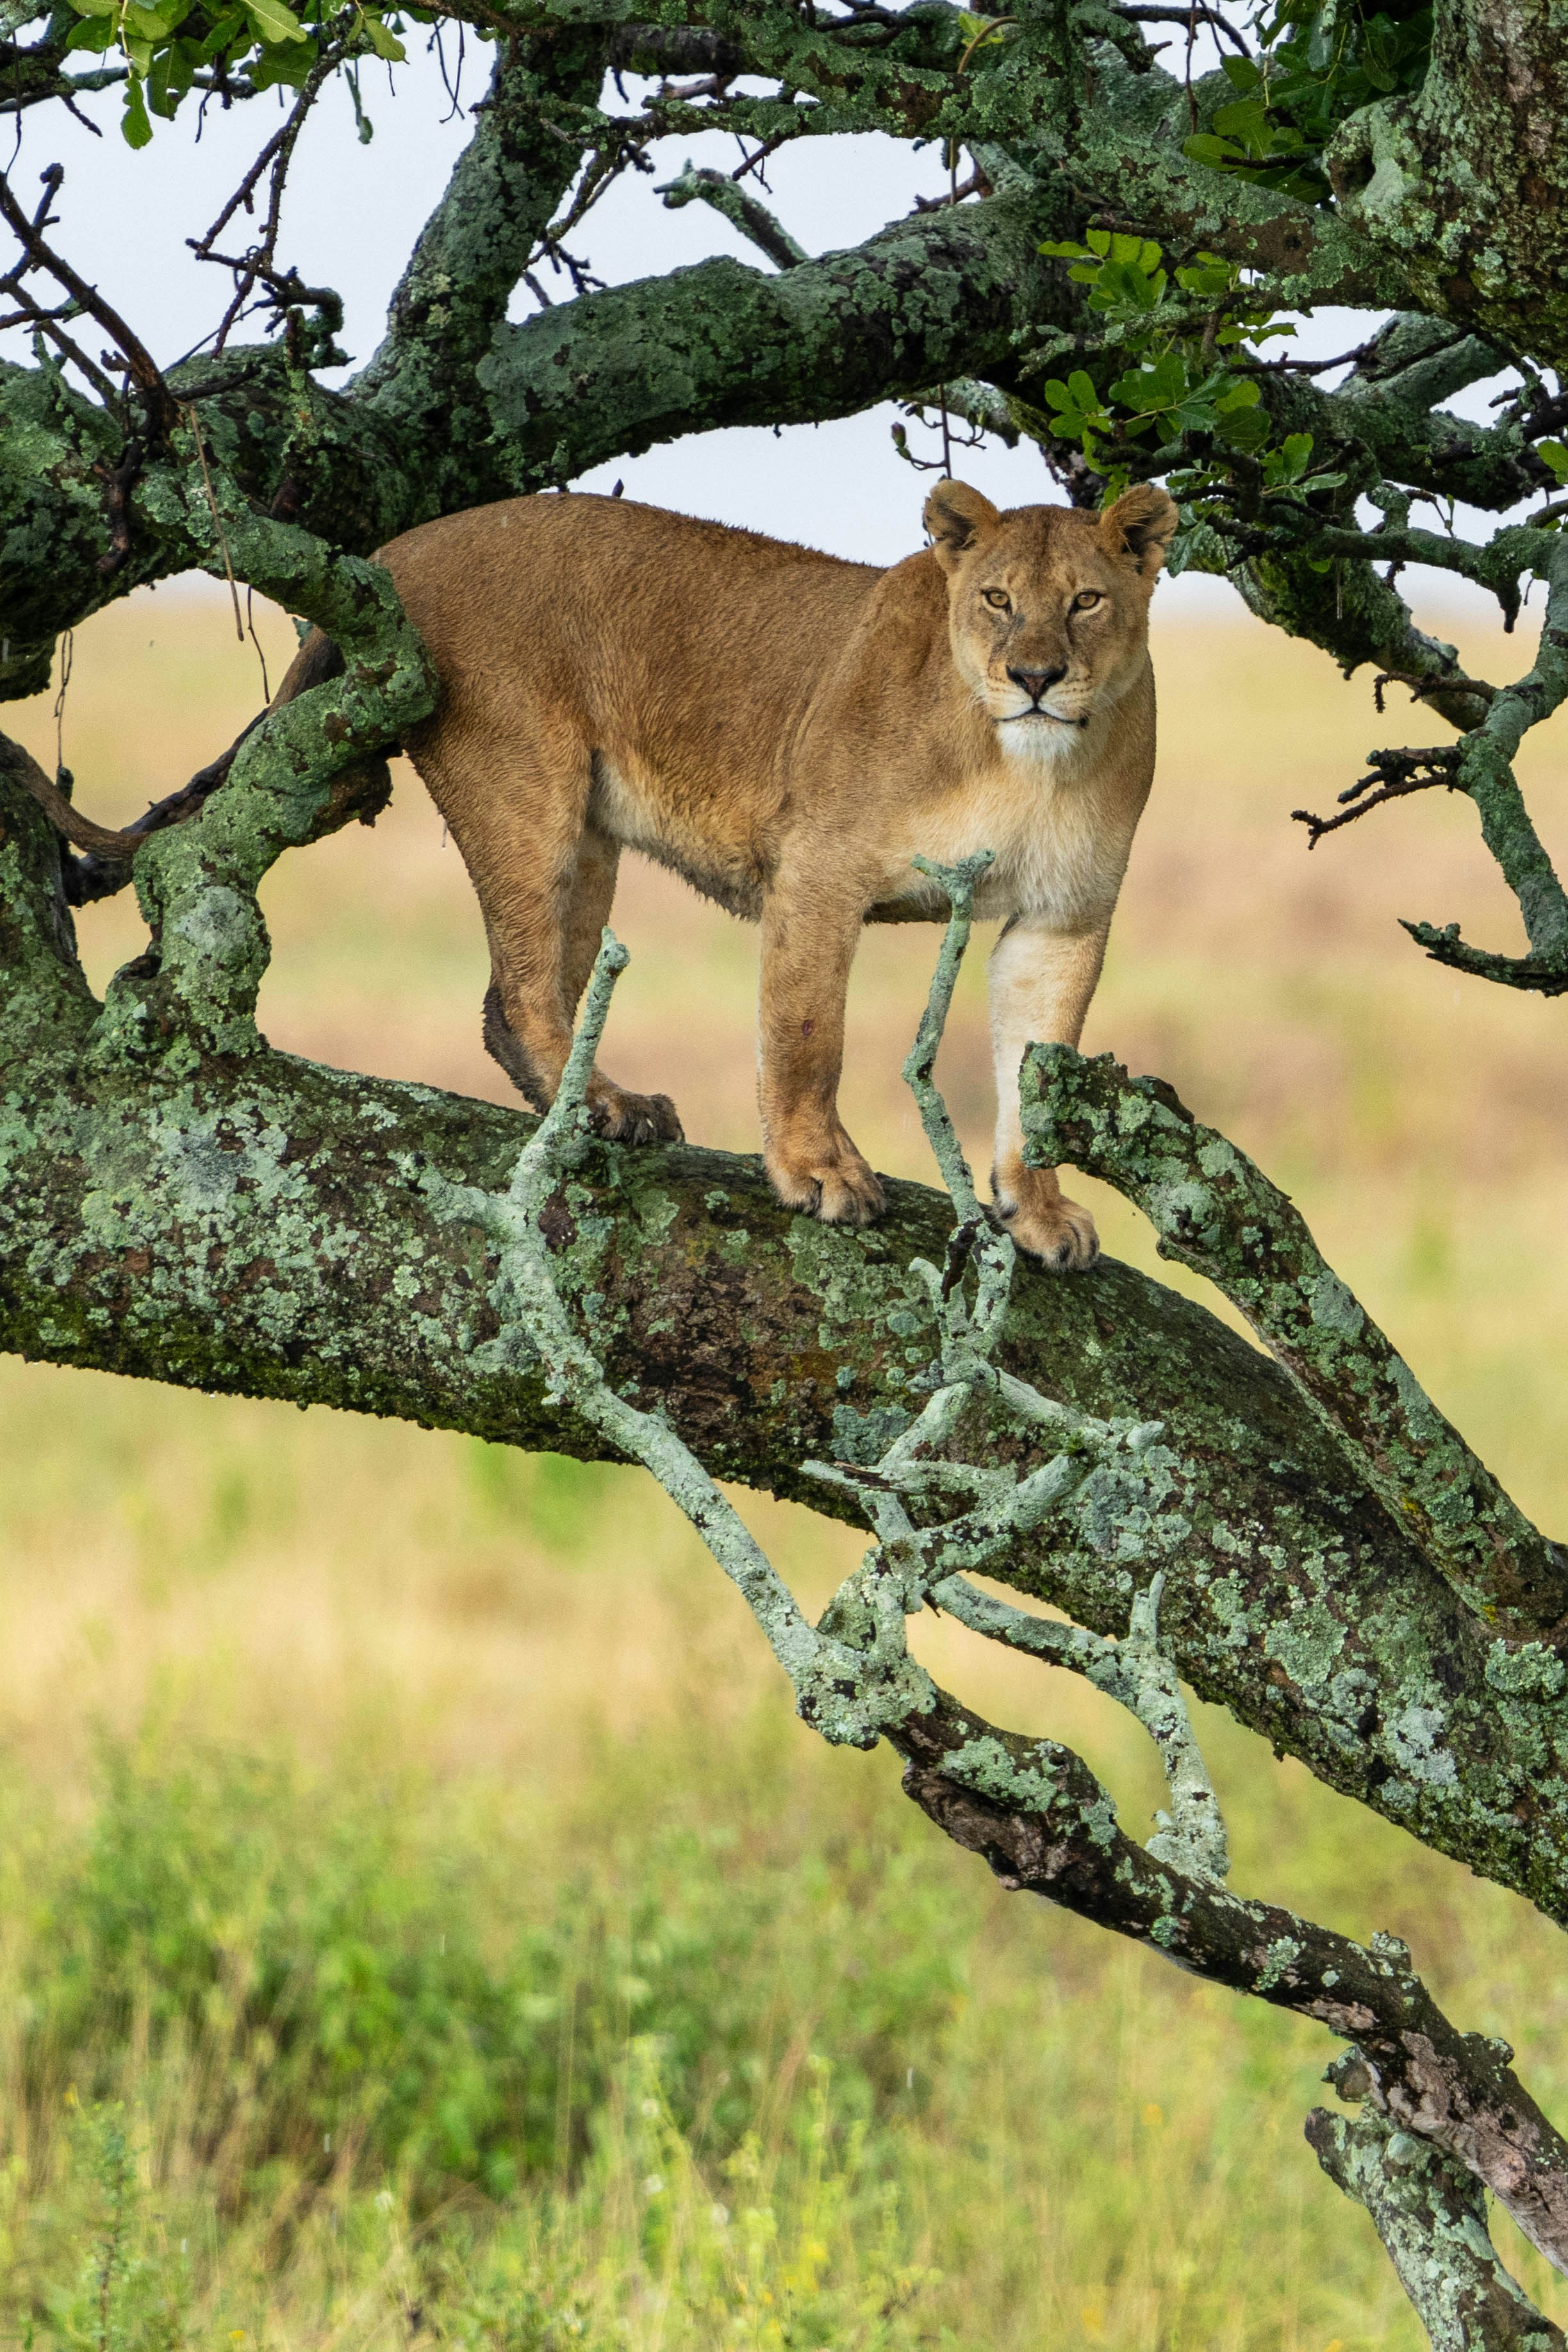 great photo recipe,how to photograph a tree lioness.